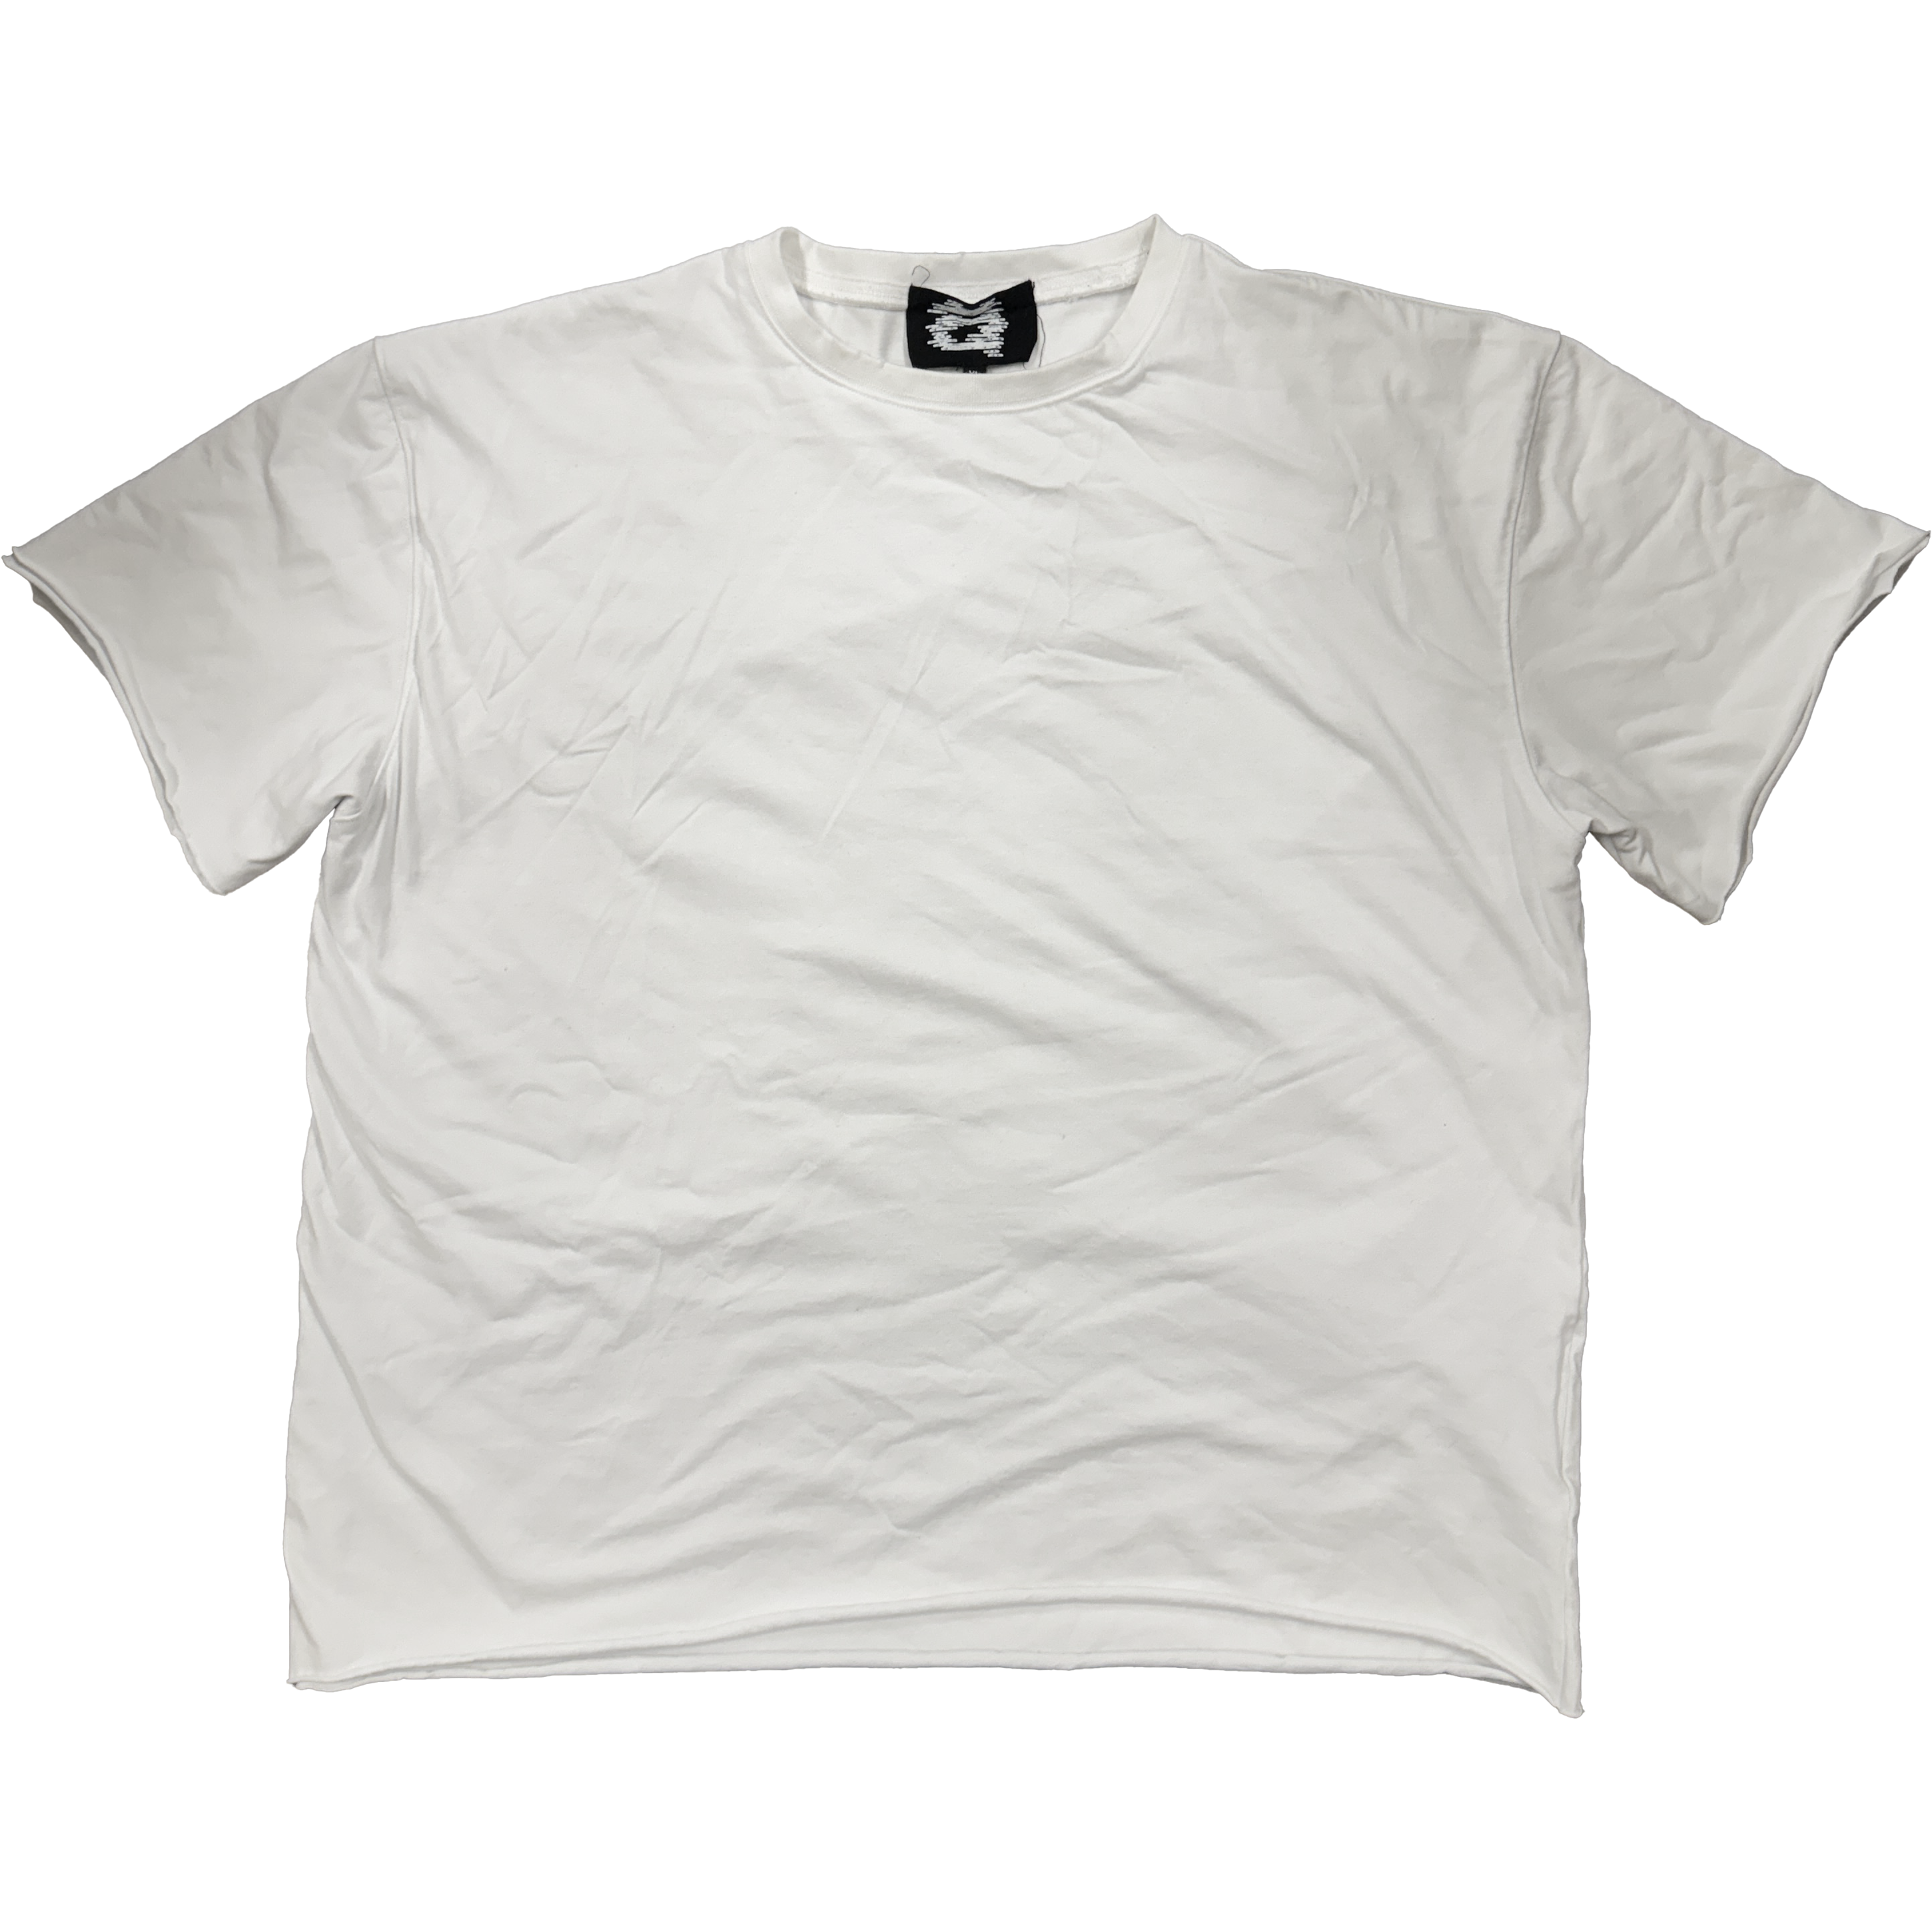 (A) 2-LAYER [360GSM] BLANK TEE